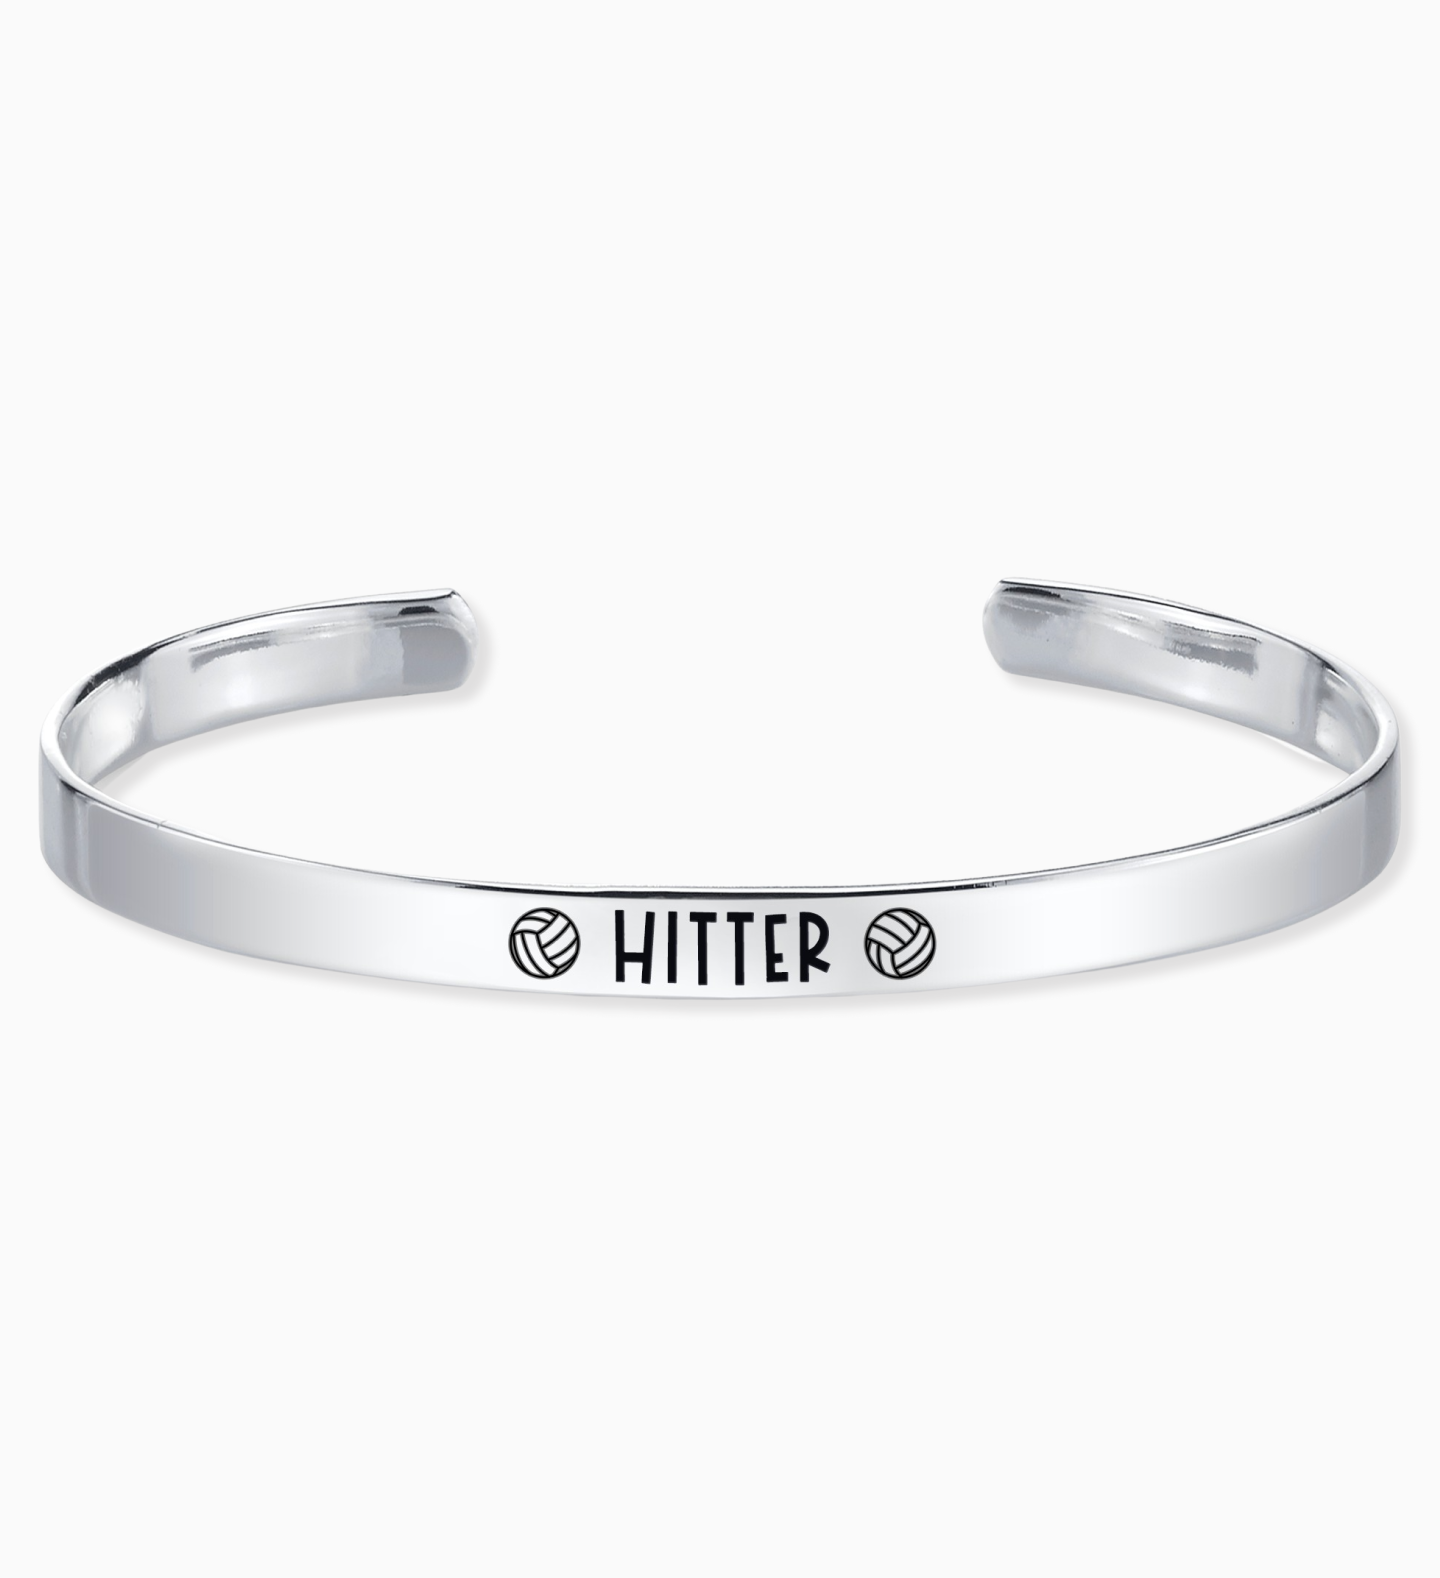 Hitter - Volleyball Position Engraved Bangle